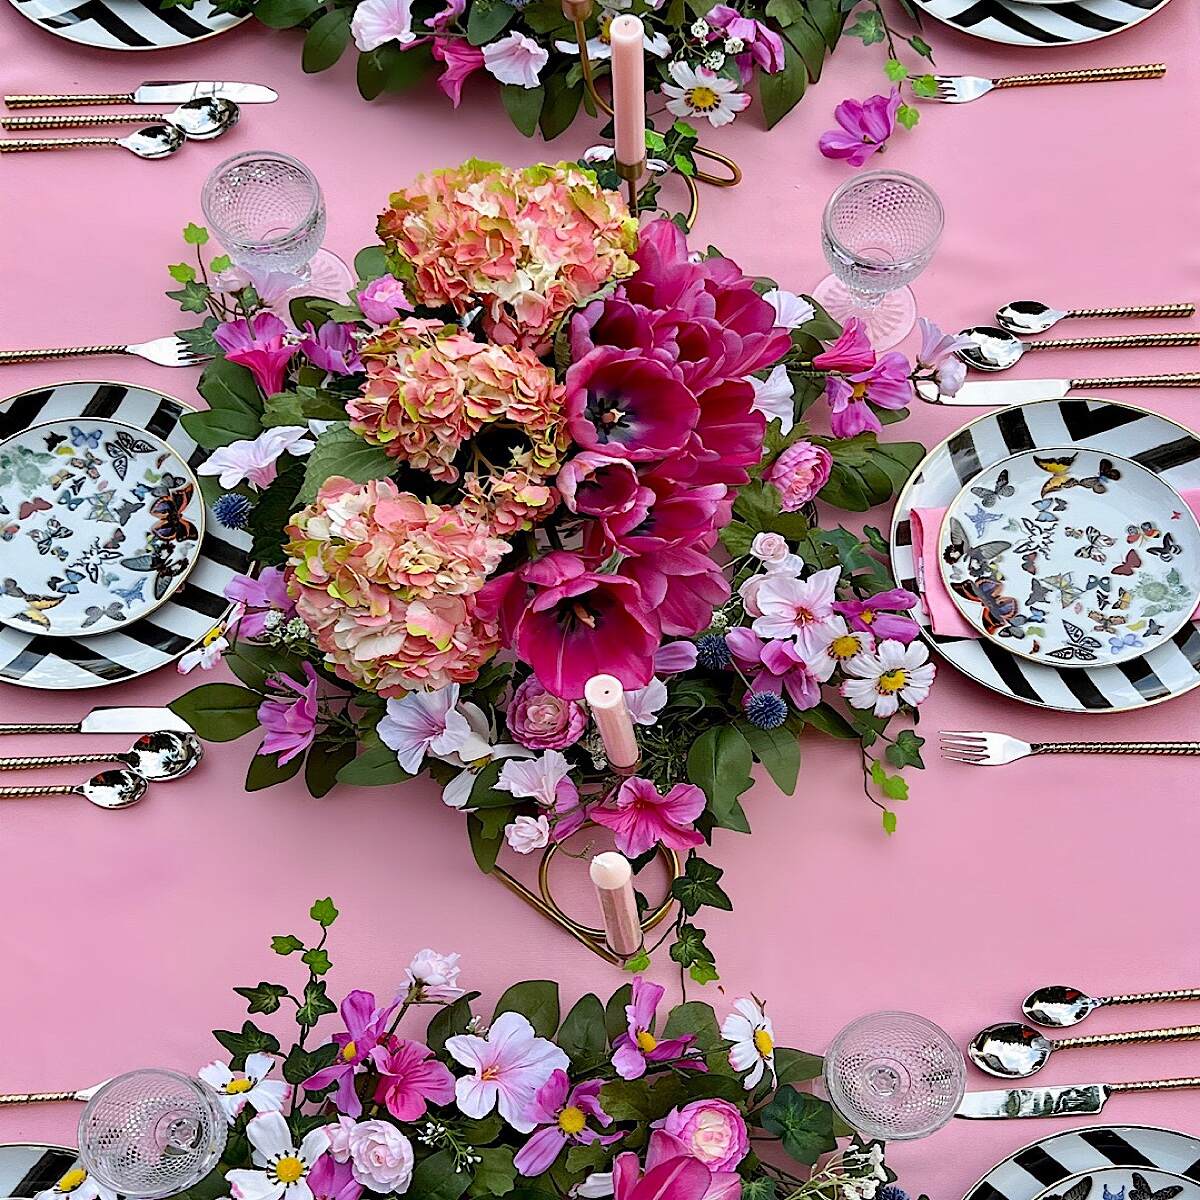 How To Create A Pink Table Centerpiece